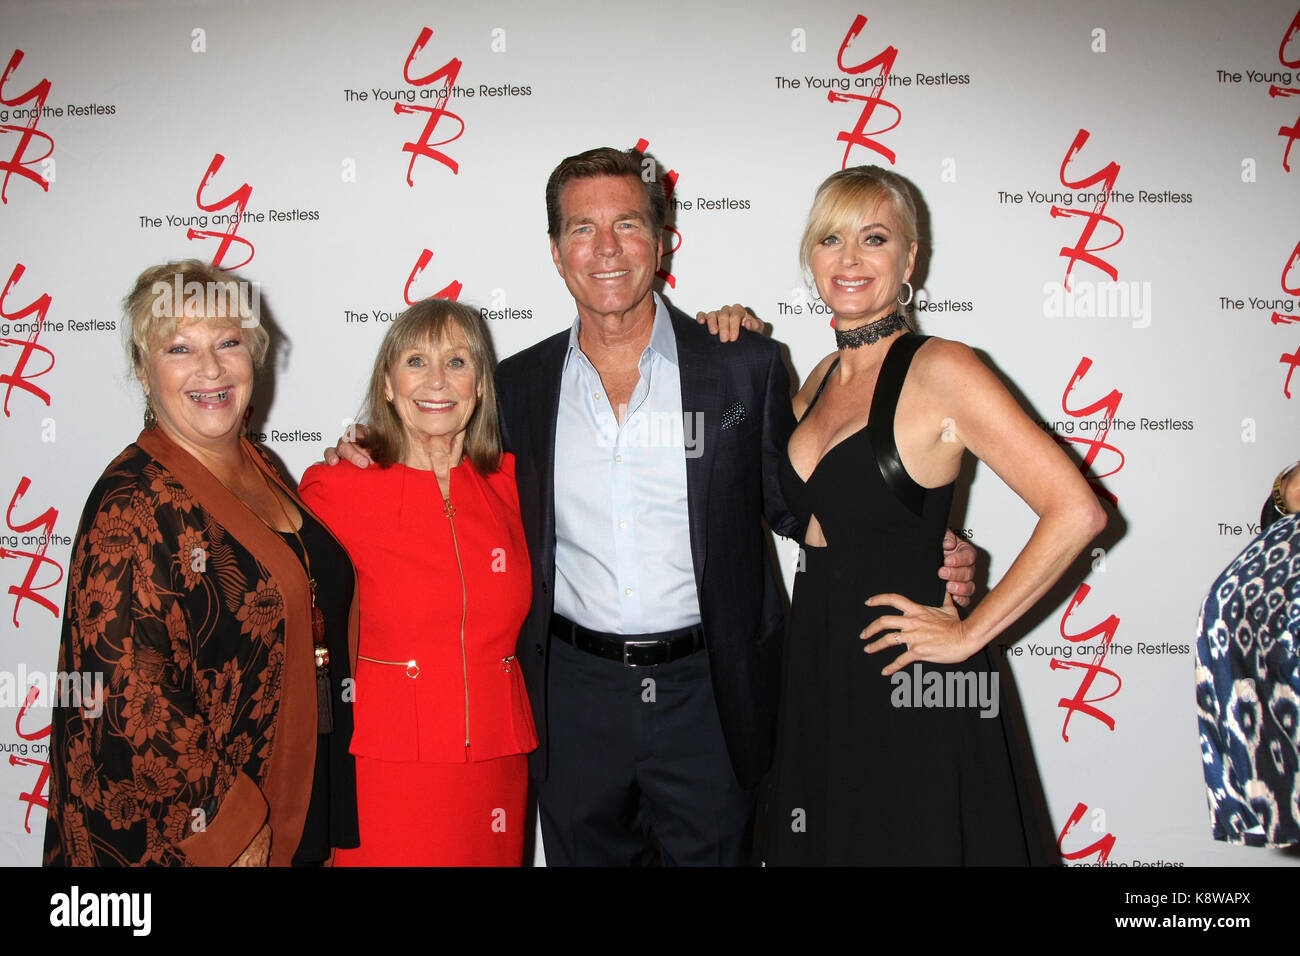 Young and Restless Fan Event 2017 at the Marriott Burbank Convention Center on August 19, 2017 in Burbank, CA  Featuring: Beth Maitland, Marla Adams, Peter Bergman, Eileen Davidson Where: Burbank, California, United States When: 20 Aug 2017 Credit: Nicky Nelson/WENN.com Stock Photo